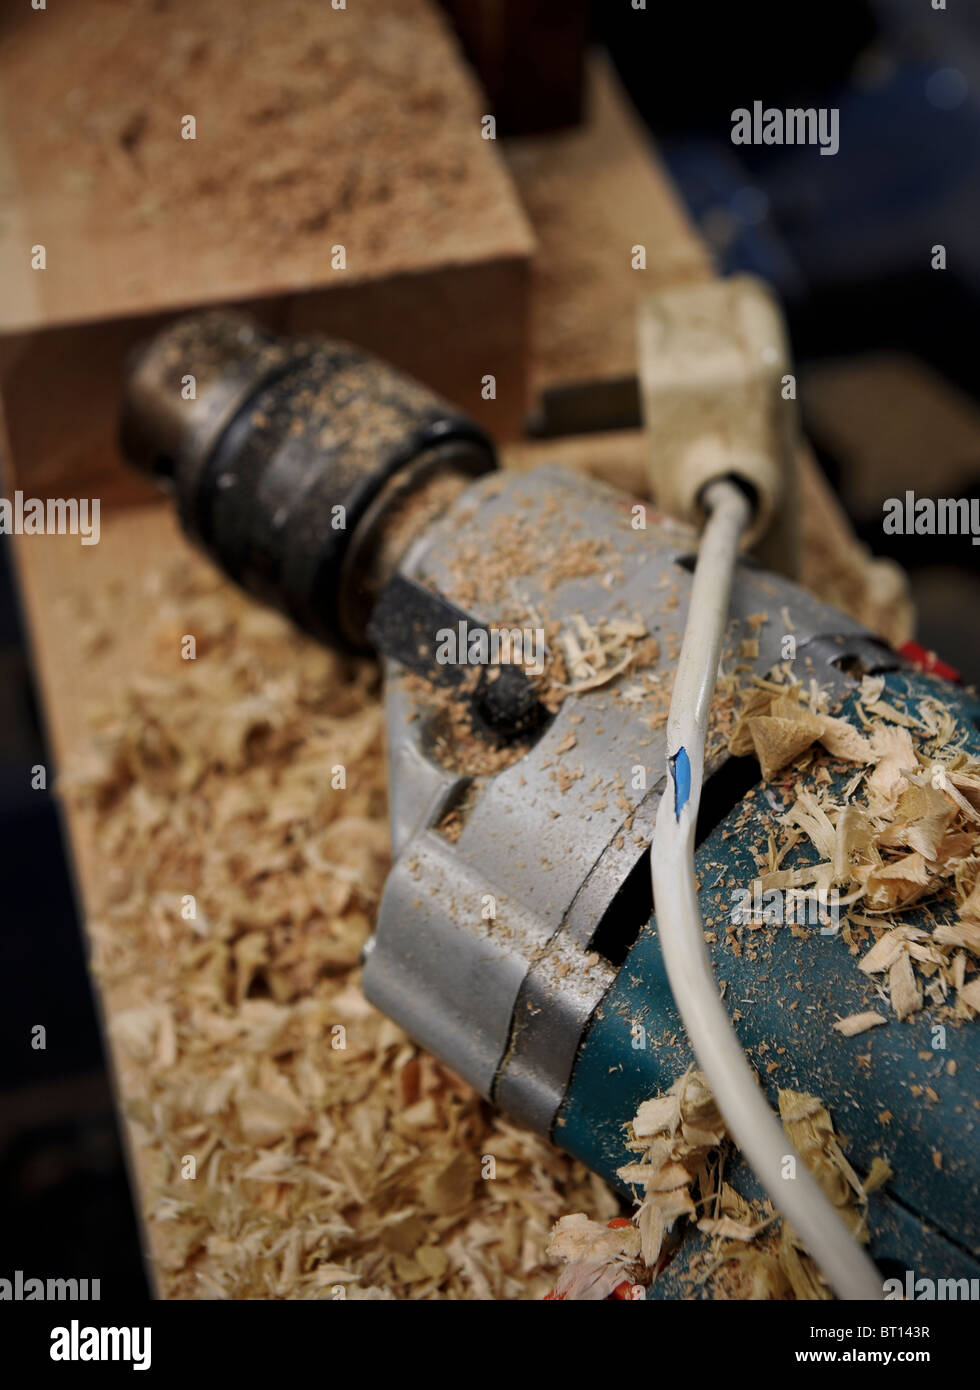 a dangerous fire risk with a split electrical plug cable on a drill surrounded with combustible materials on a work bench Stock Photo